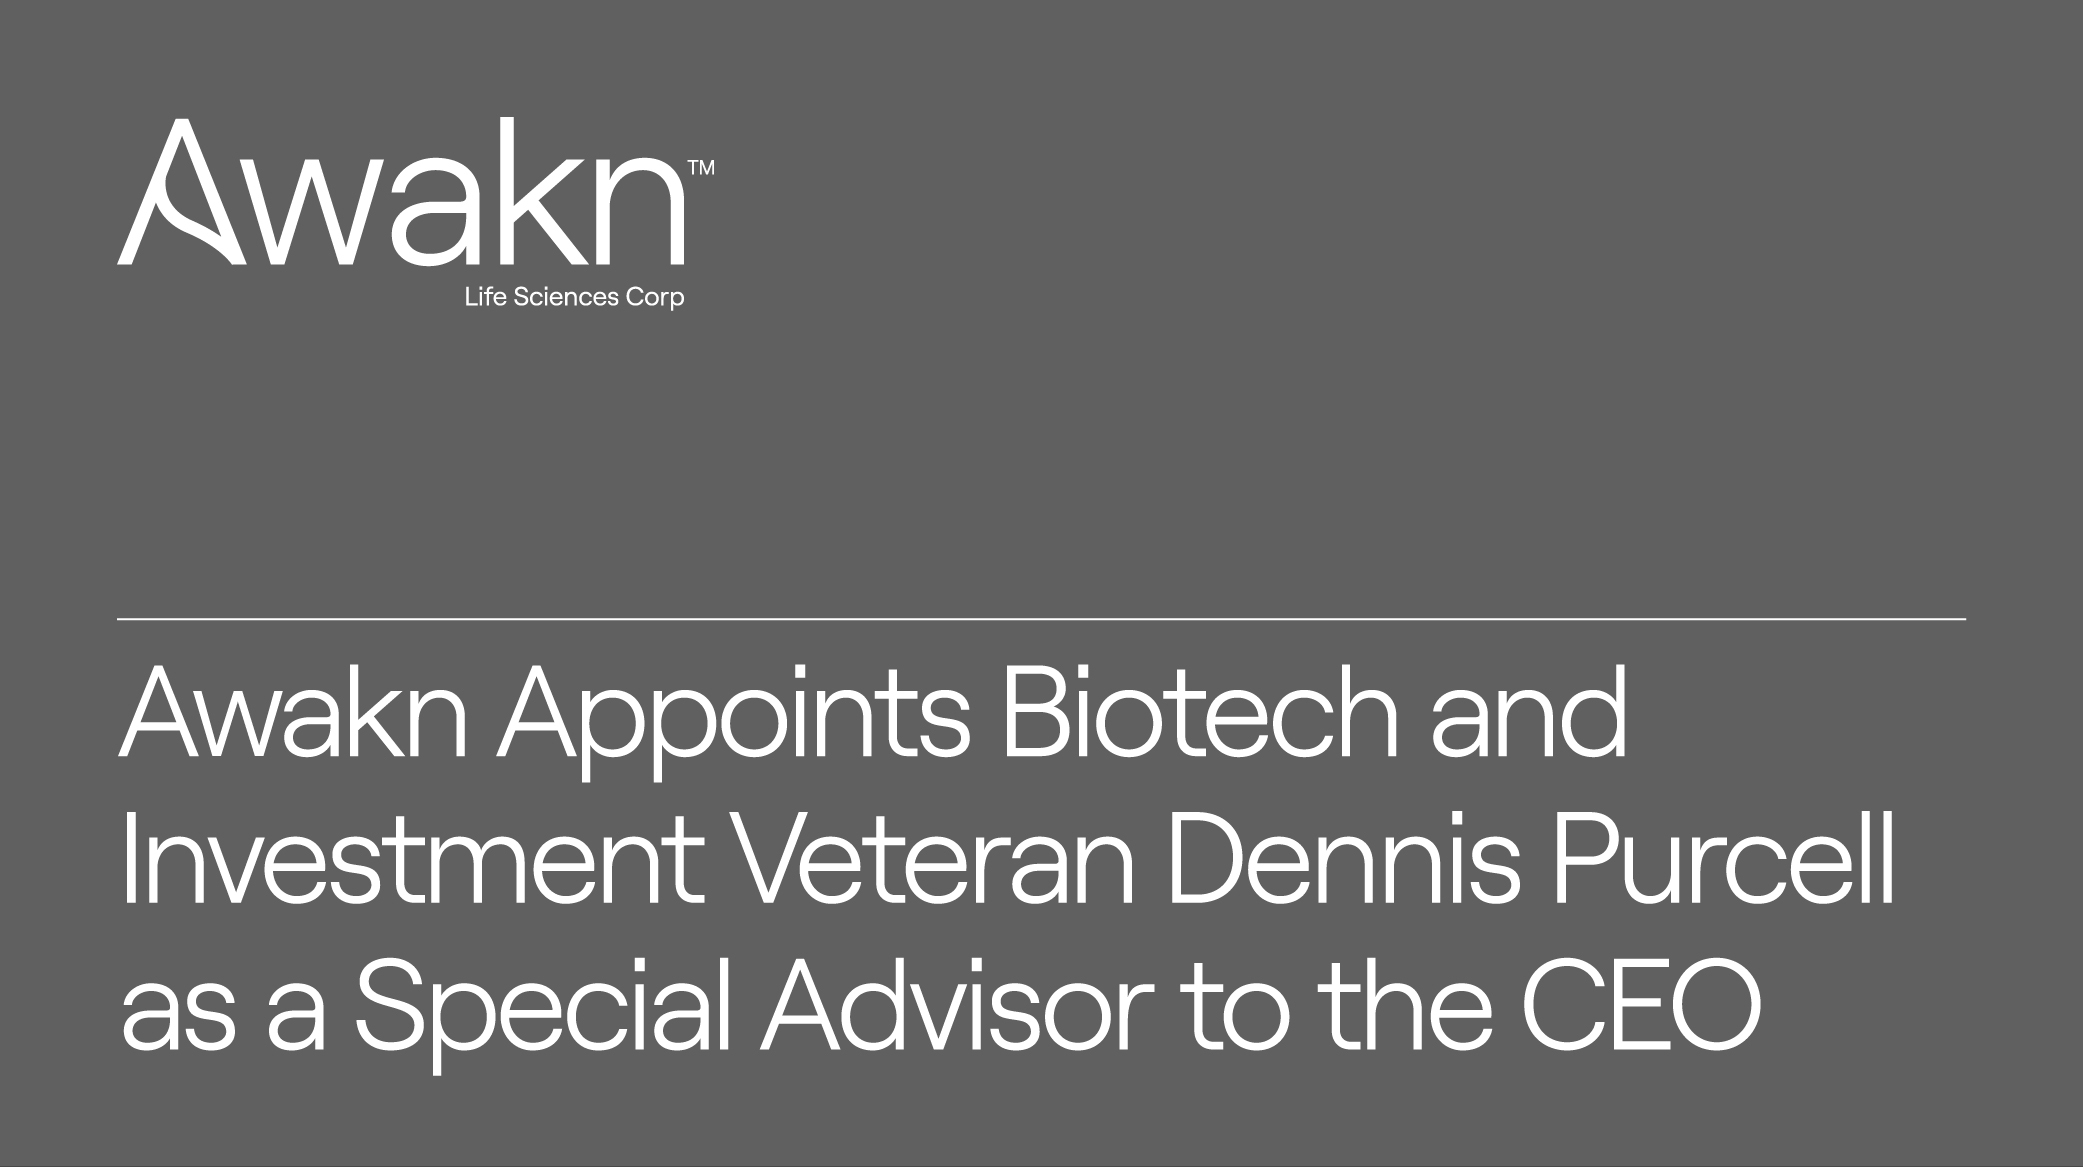 Awakn Life Sciences Appoints Biotech and Investment Veteran Dennis Purcell as a Special Advisor To The CEO